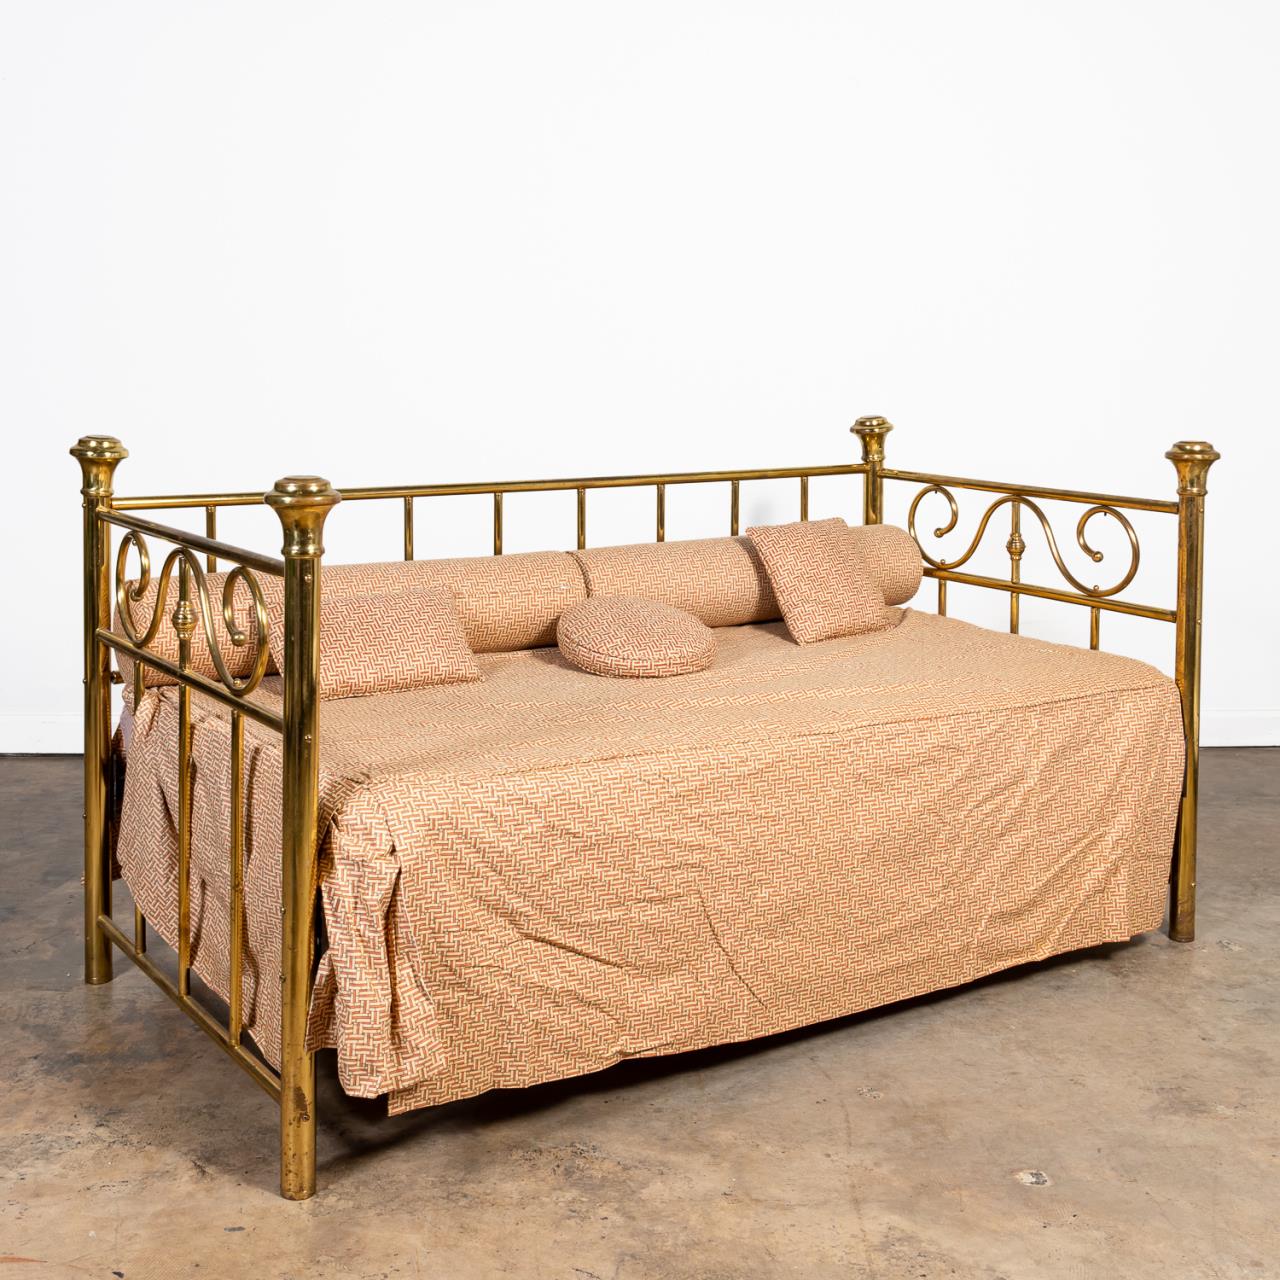 20TH C VICTORIAN STYLE BRASS DAYBED 3598a0